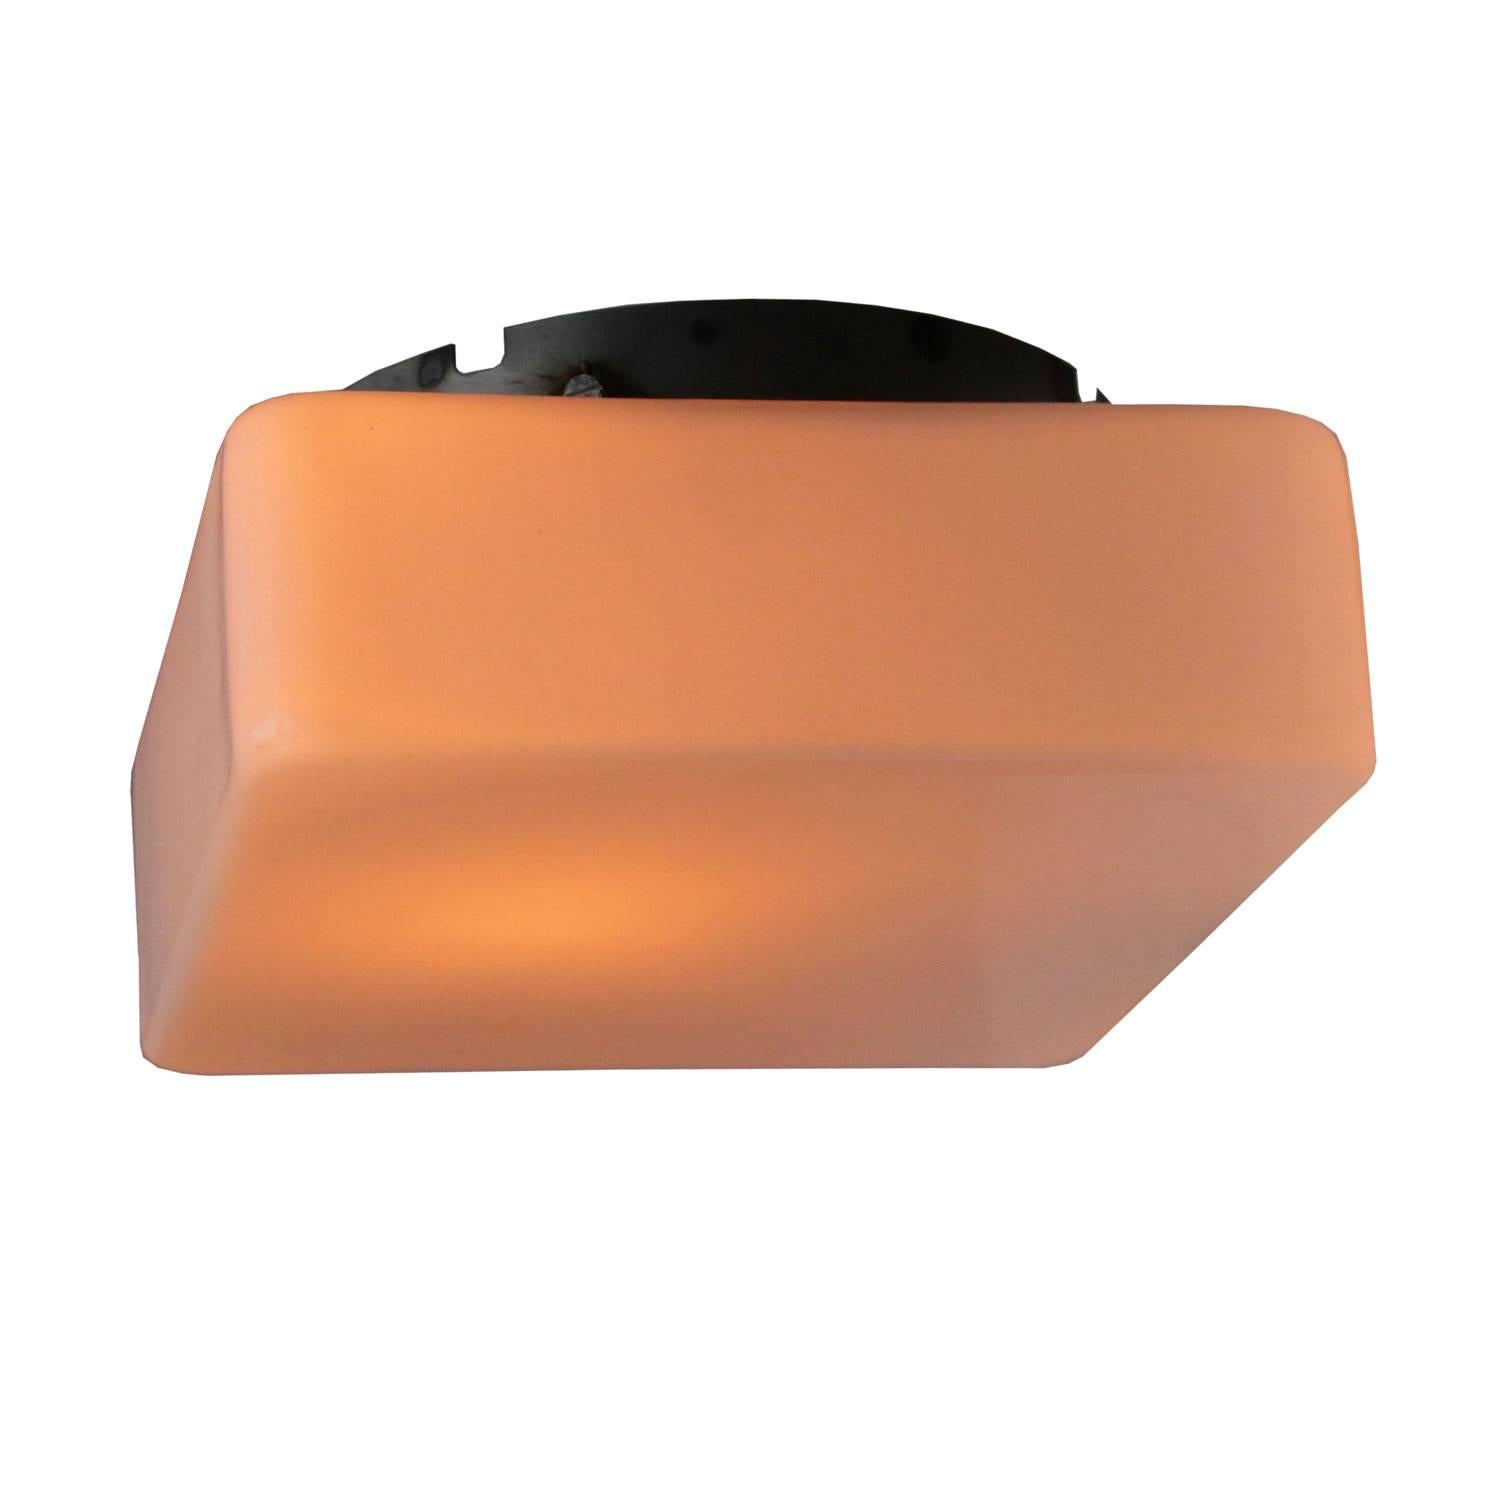 Industrial ceiling and wall lamp. Metal base with white Opaline glass.

Weight: 2.2 kg / 4.9 lb

All lamps have been made suitable by international standards for incandescent light bulbs, energy-efficient and LED bulbs. E26/E27 bulb holders and new